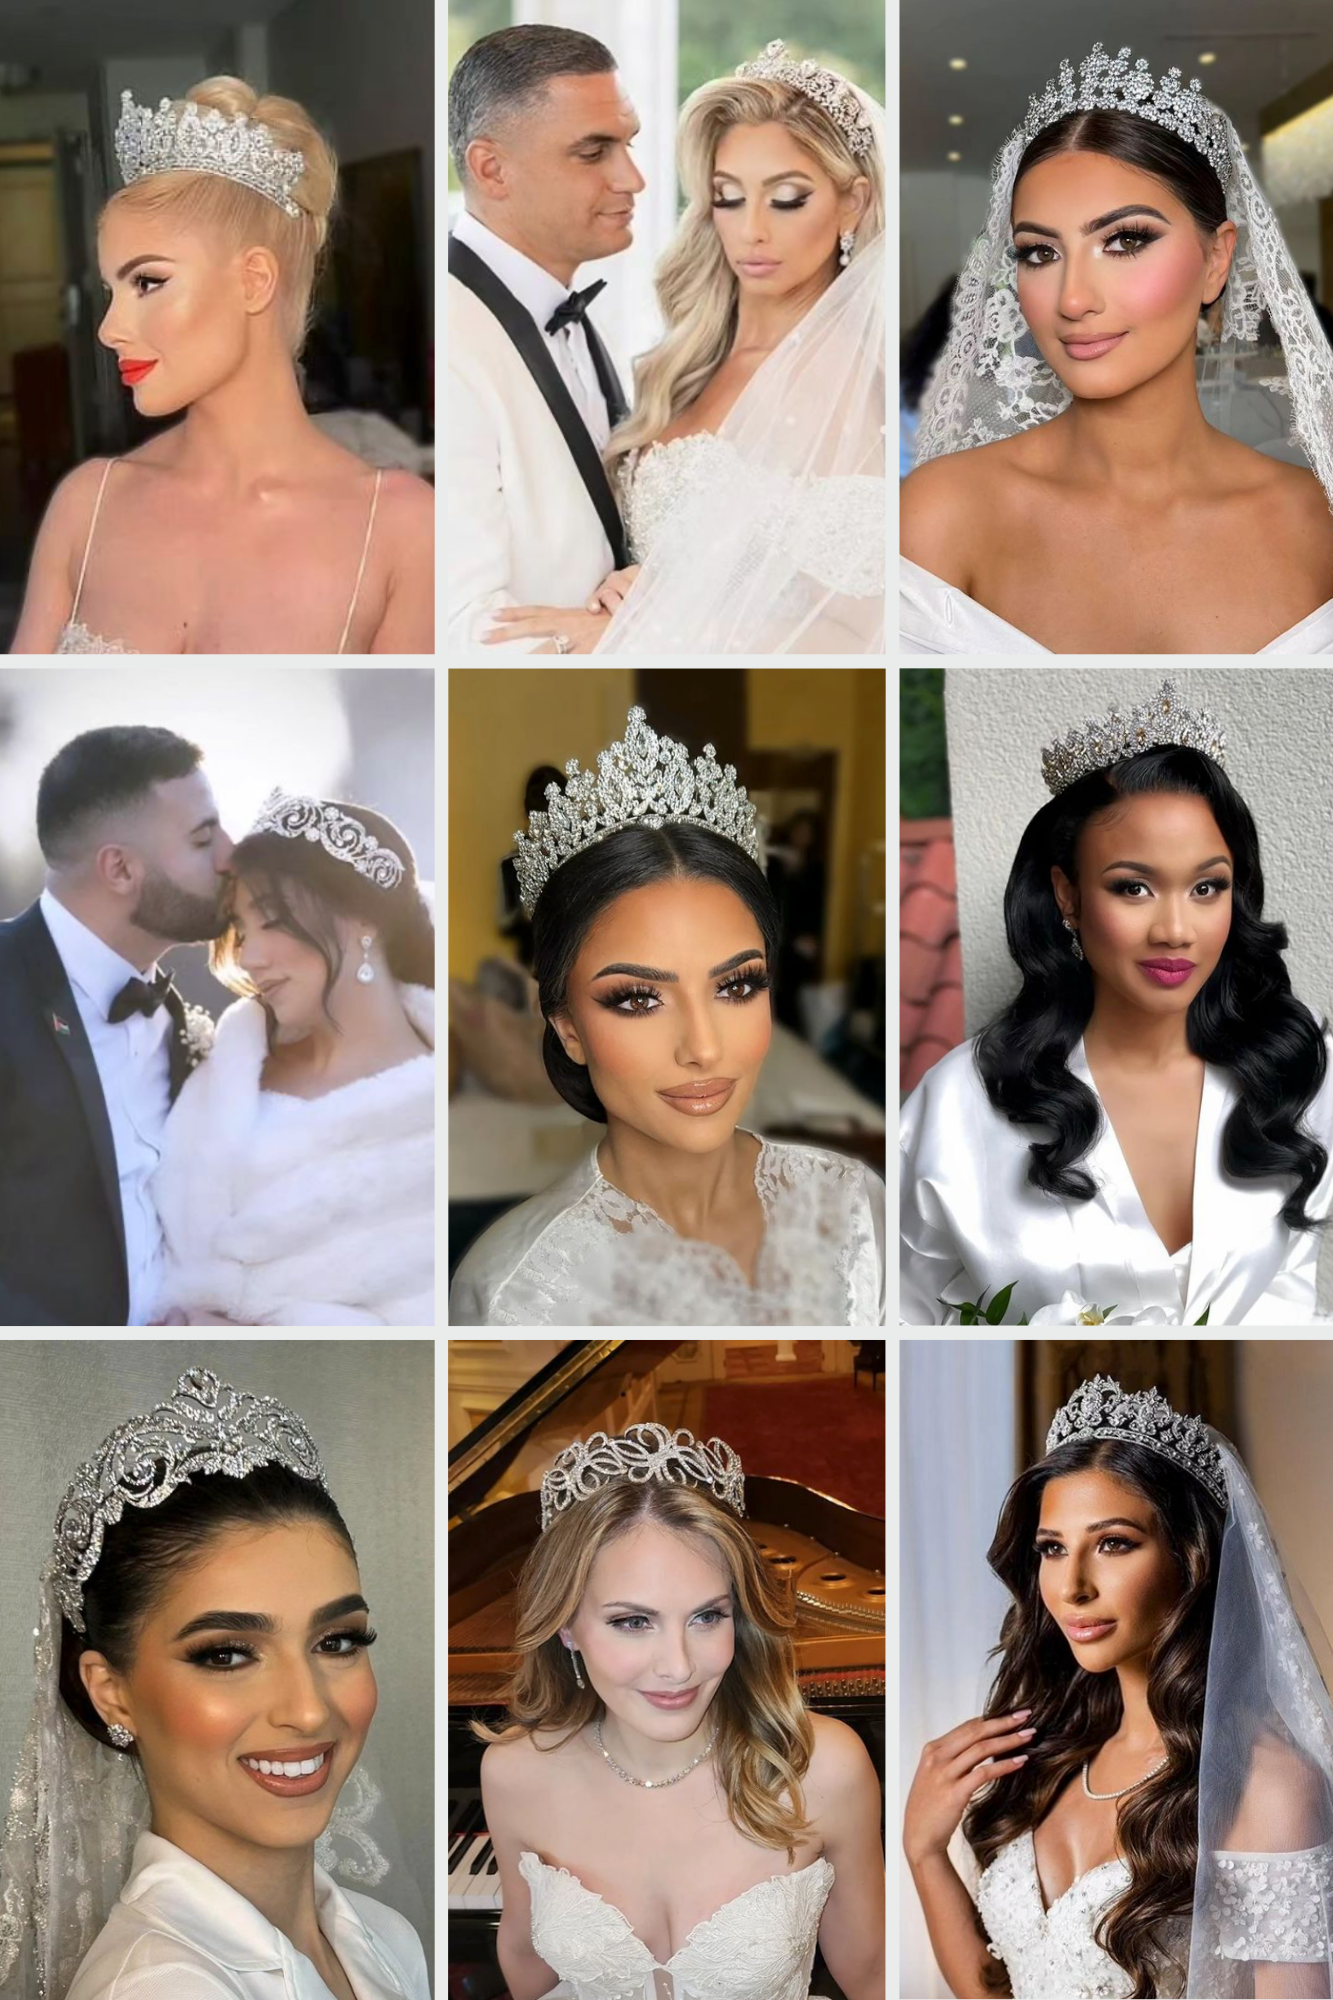 Ten images of brides wearing their sparkling custom tiaras and wedding crowns from Bridal Styles Boutique.